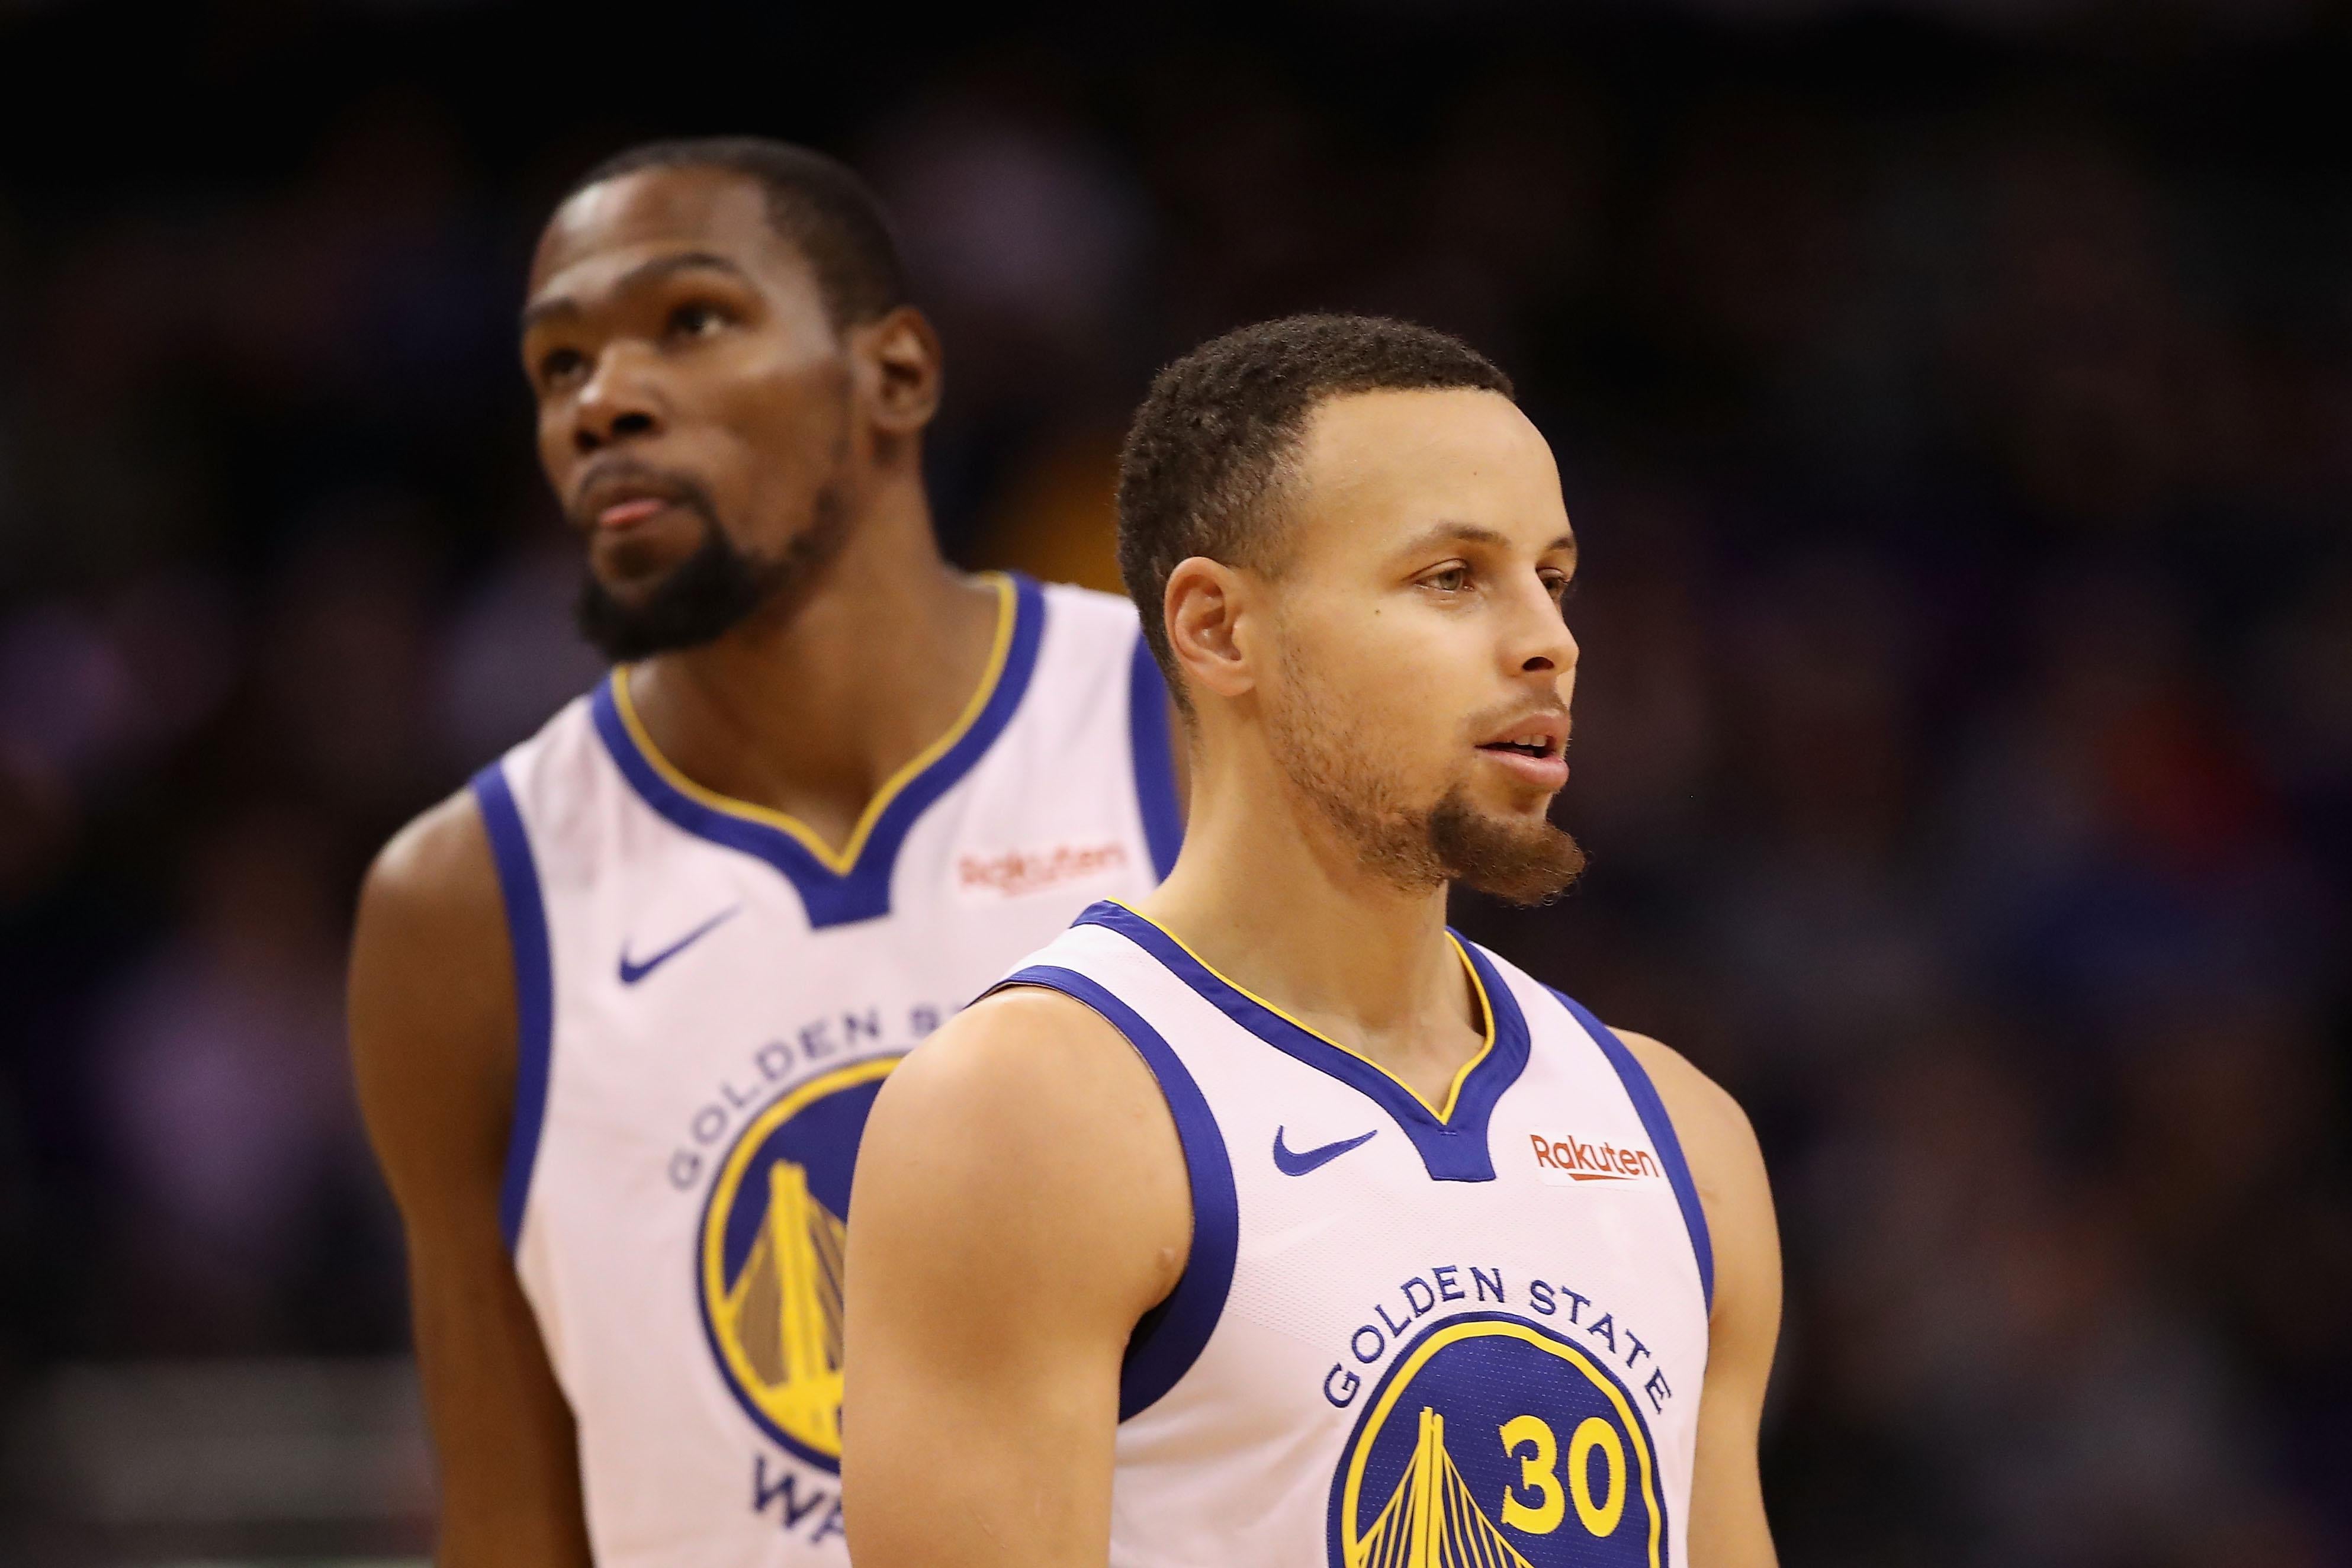 PHOENIX, ARIZONA - FEBRUARY 08:  Stephen Curry #30 and Kevin Durant #35 of the Golden State Warriors during the first half of the NBA game against the Phoenix Suns at Talking Stick Resort Arena on February 08, 2019 in Phoenix, Arizona. (Photo by Christian Petersen/Getty Images)